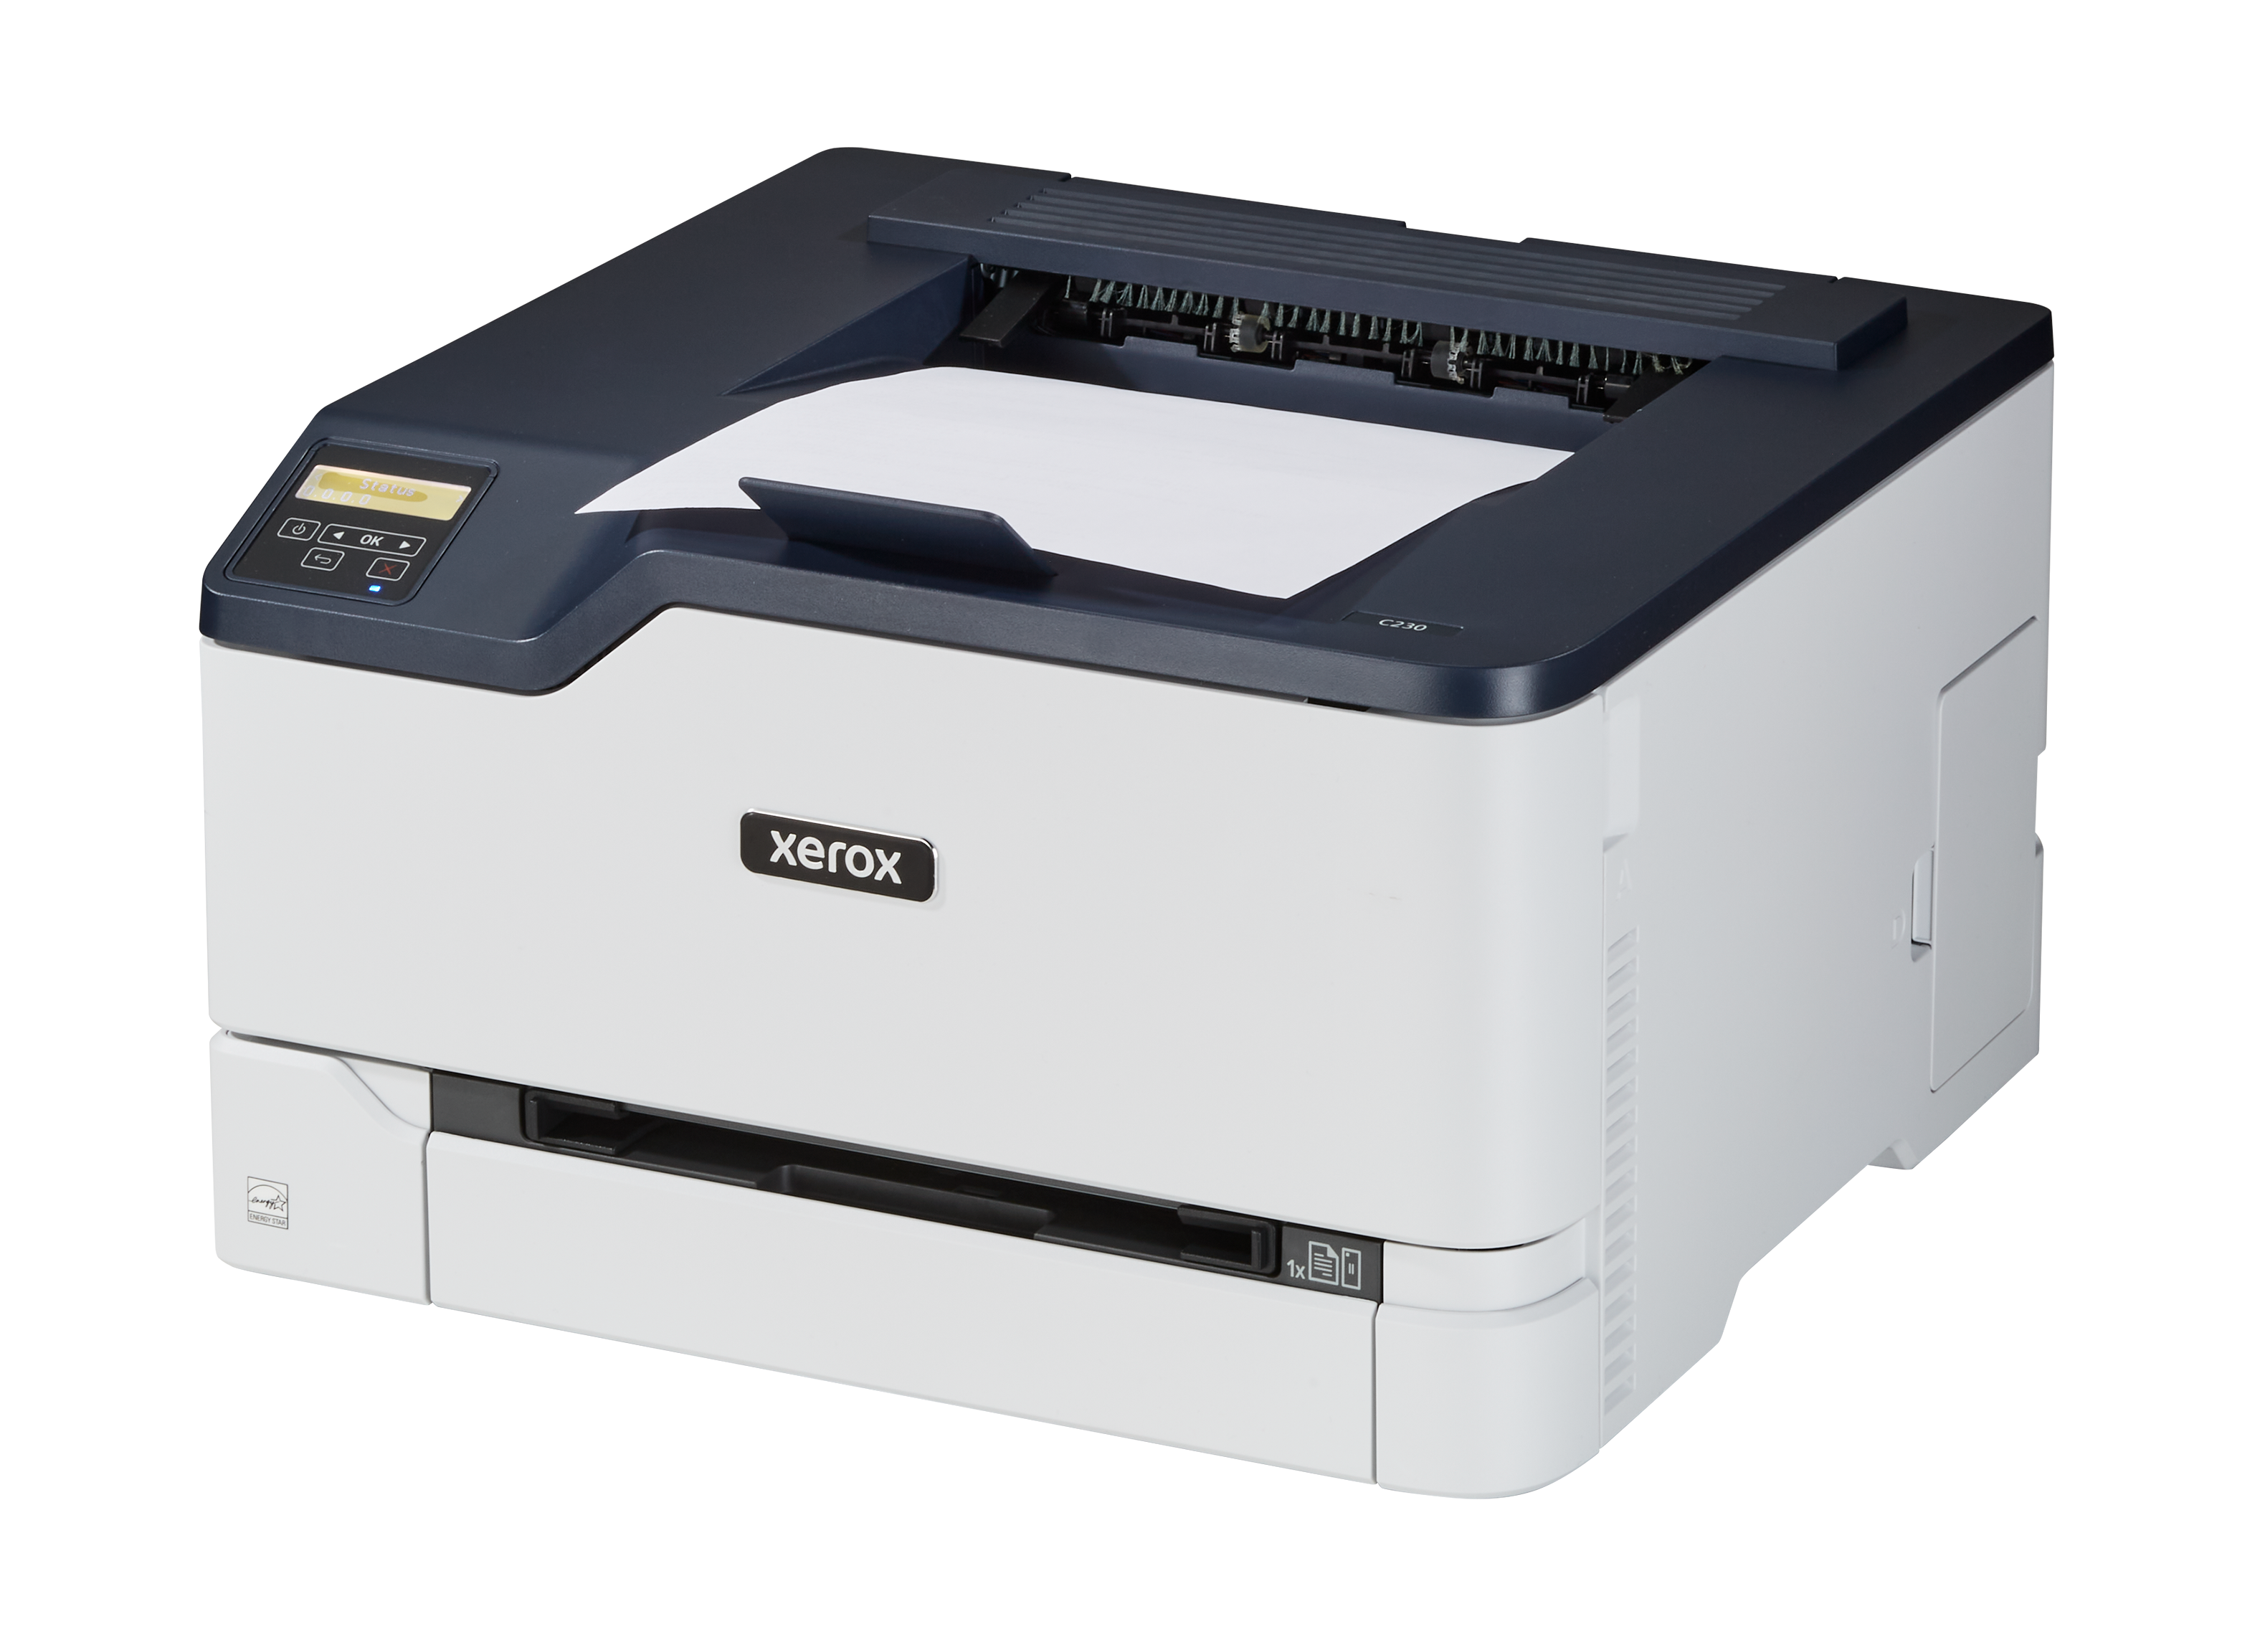 Connect Xerox Printer to Mobile 